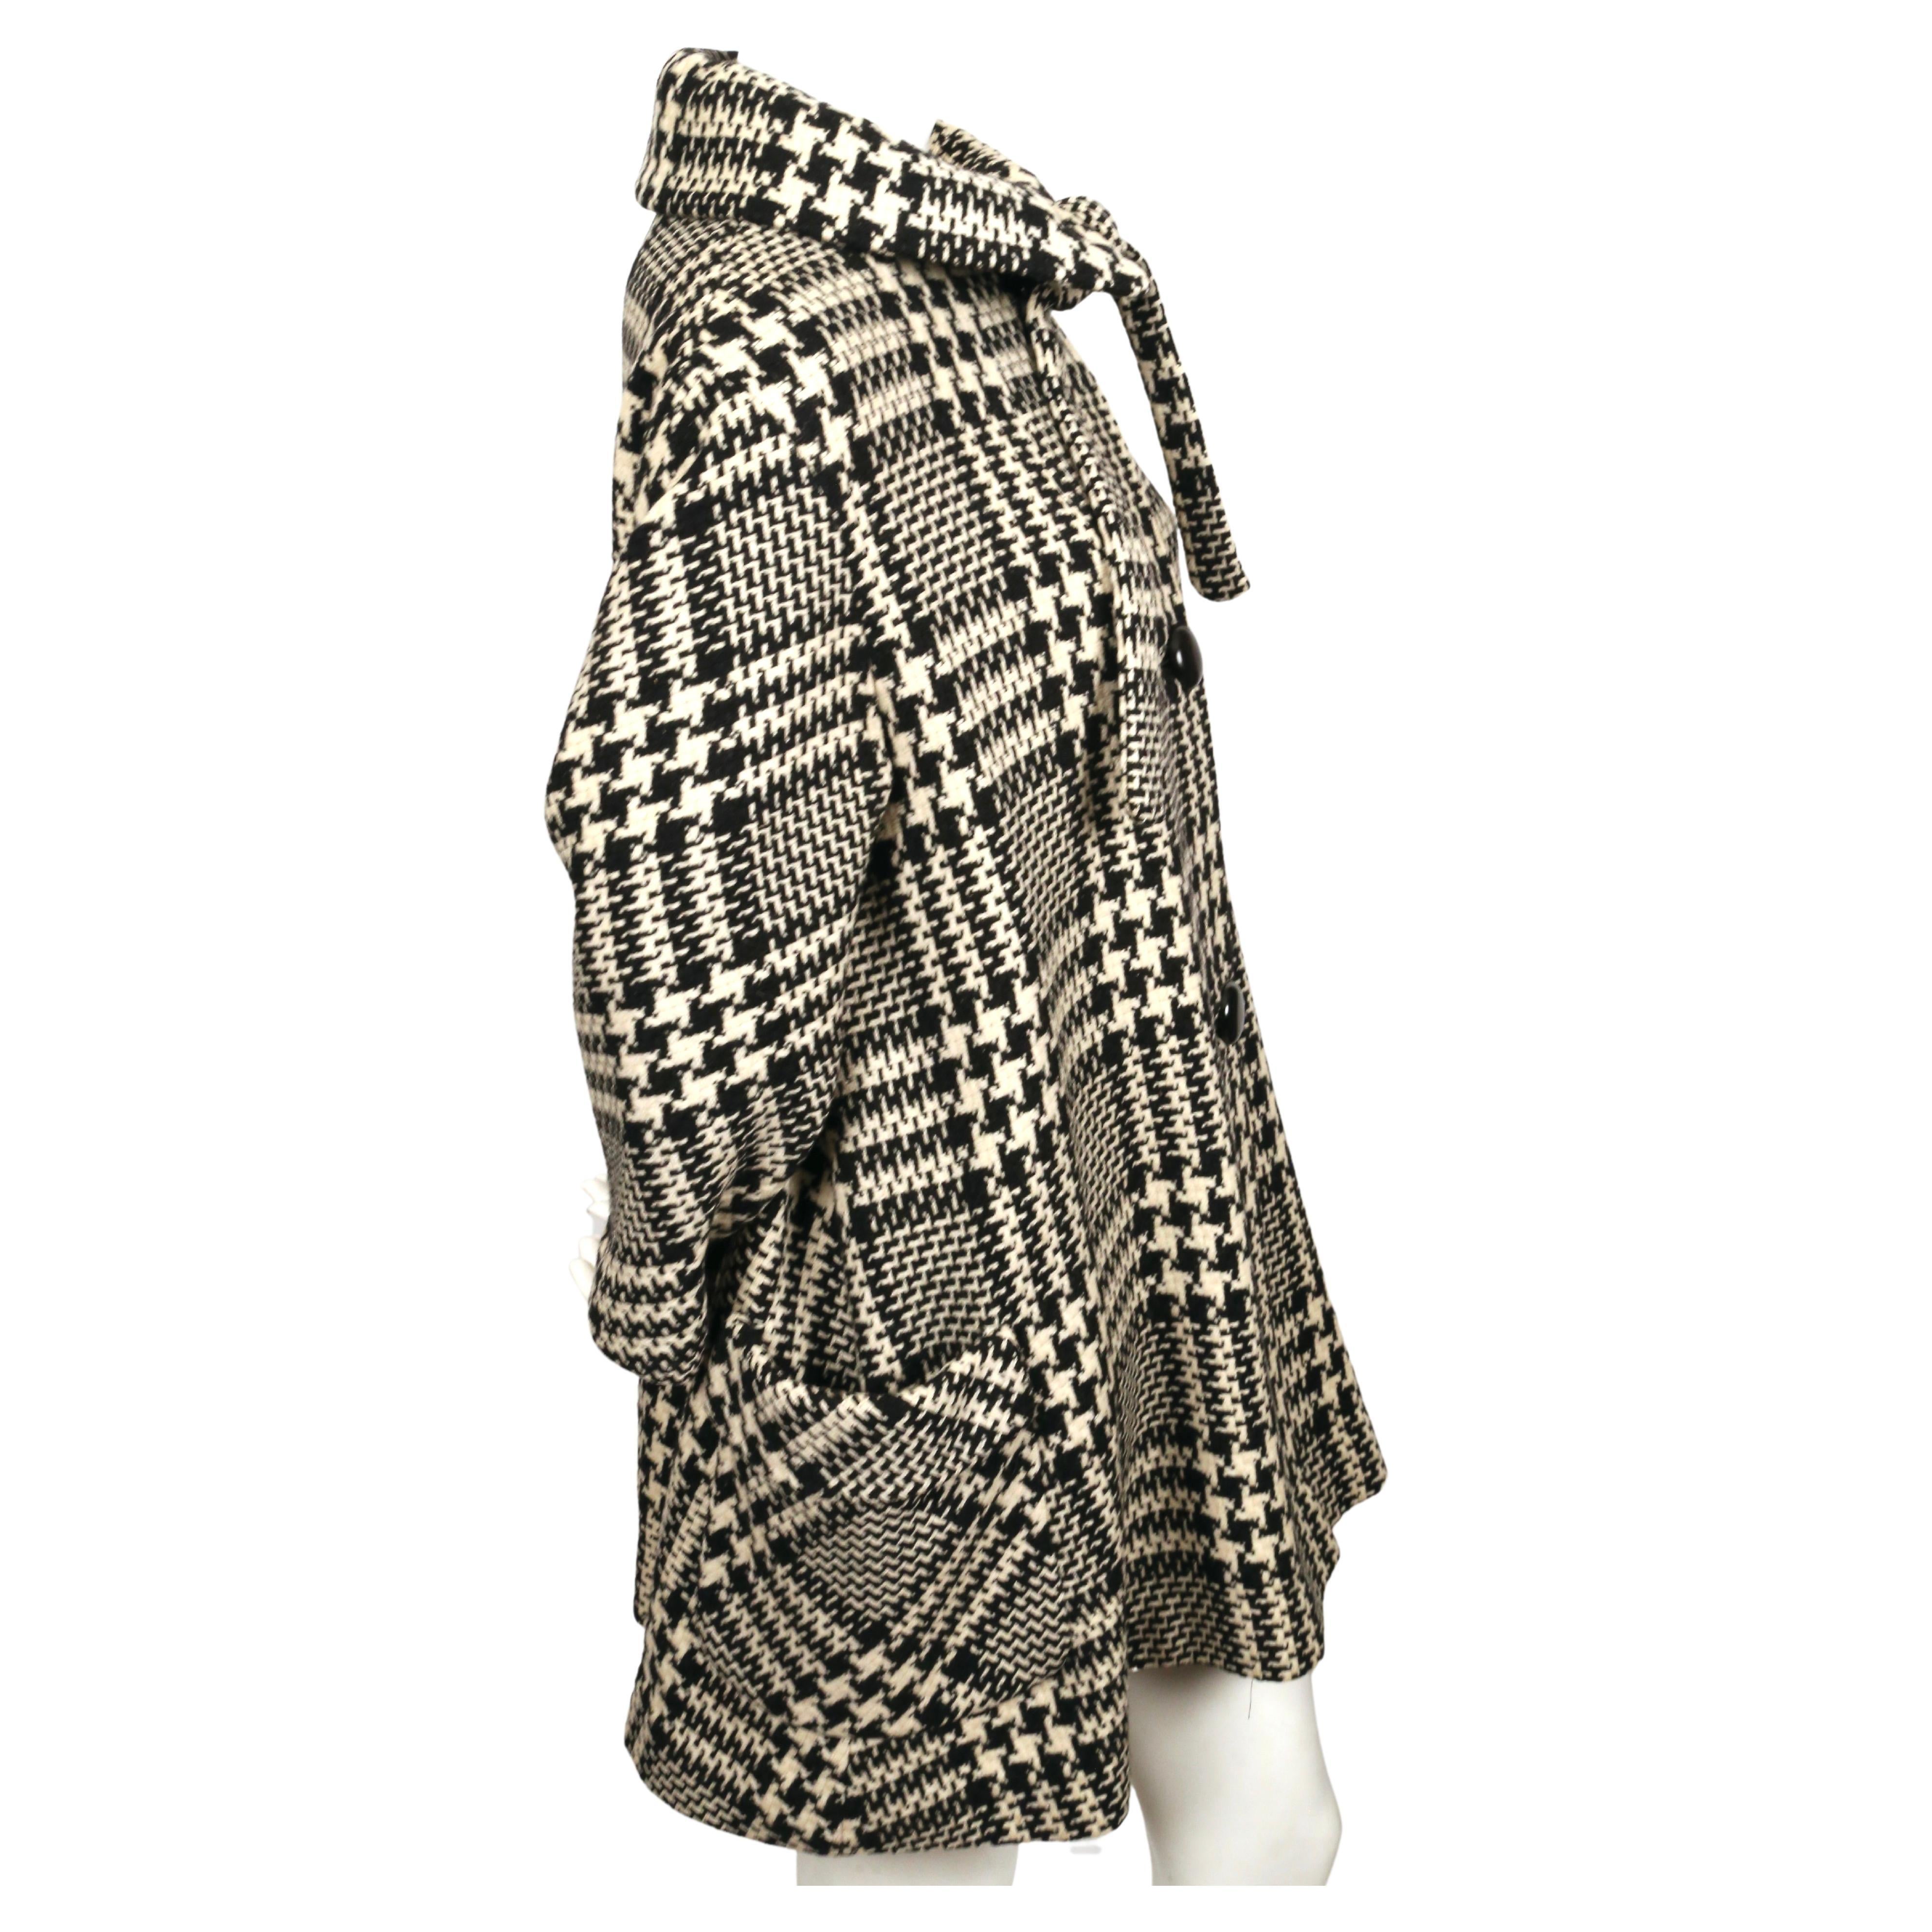 1960's JOSEPH MAGNIN wool houndstooth swing coat with neck tie & skirt In Good Condition For Sale In San Fransisco, CA